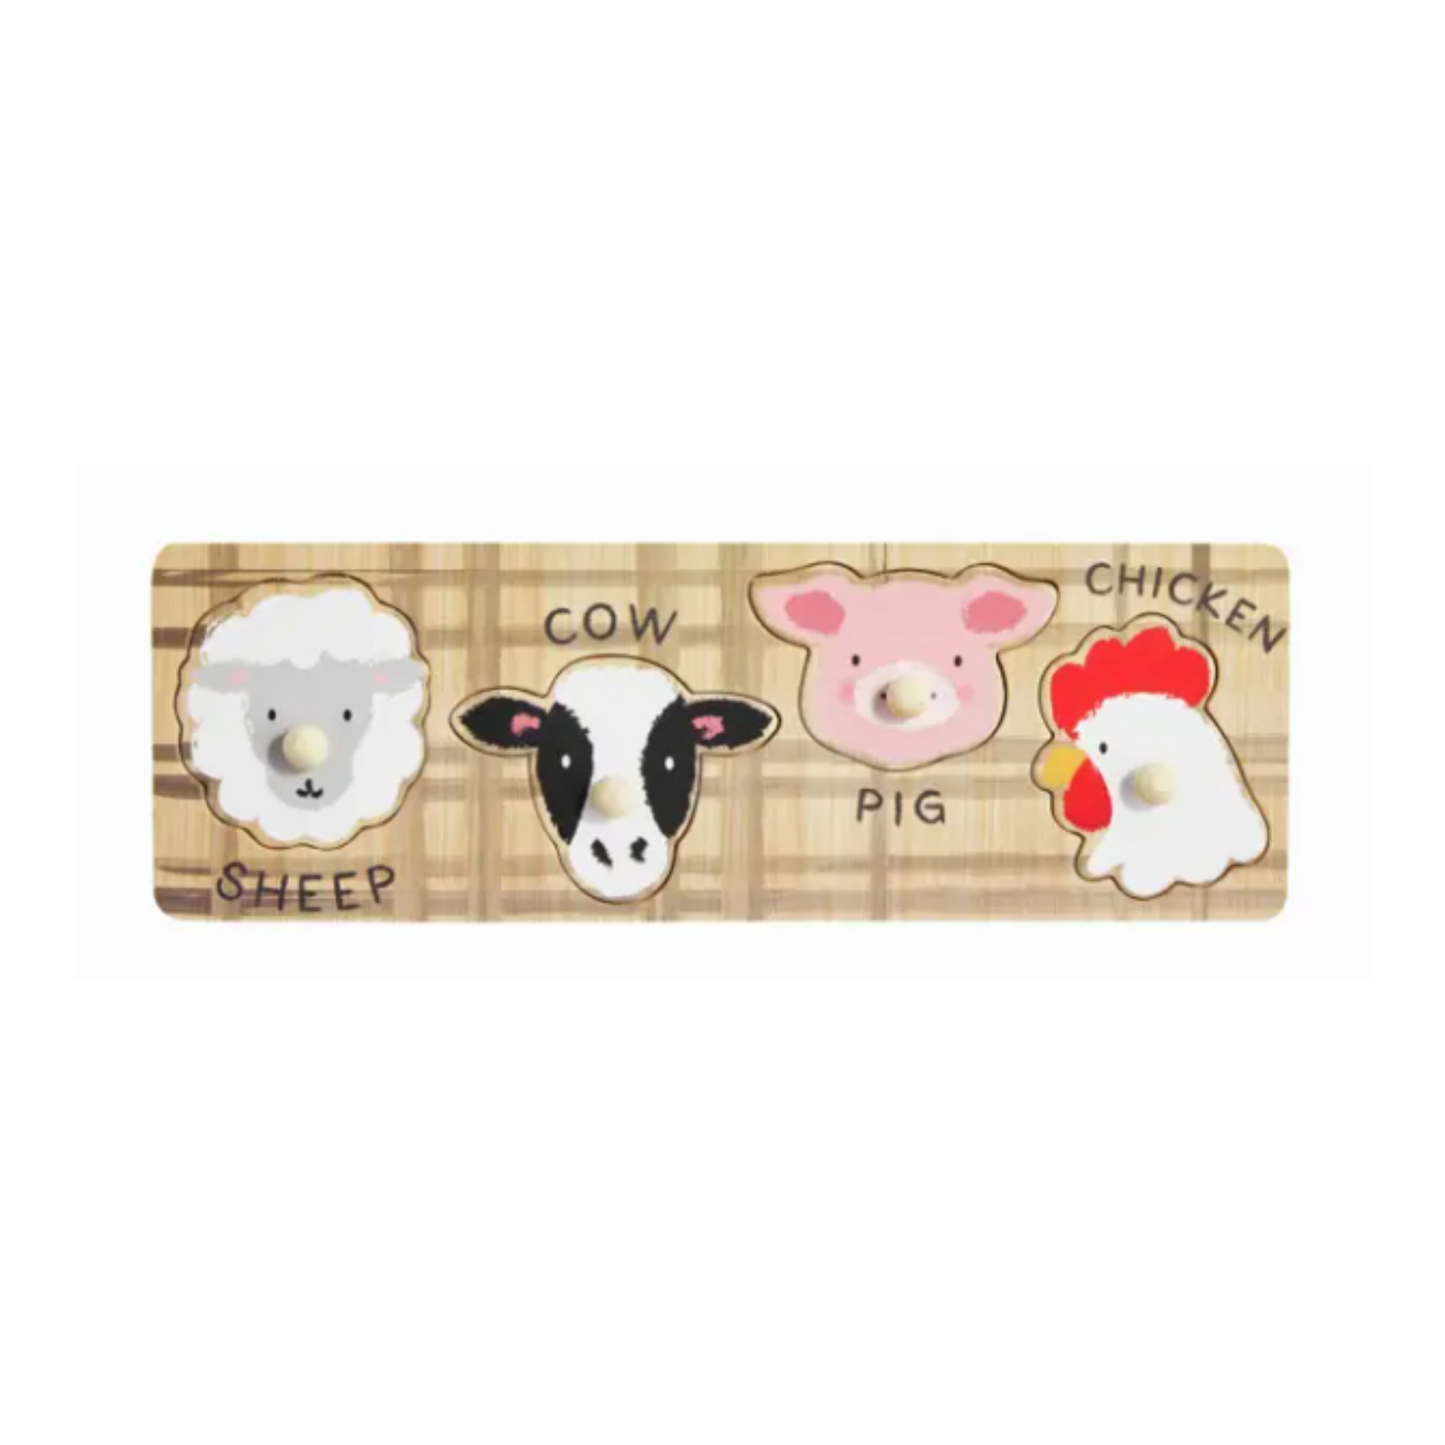 Sheep Cow Pig Chicken wood puzzle